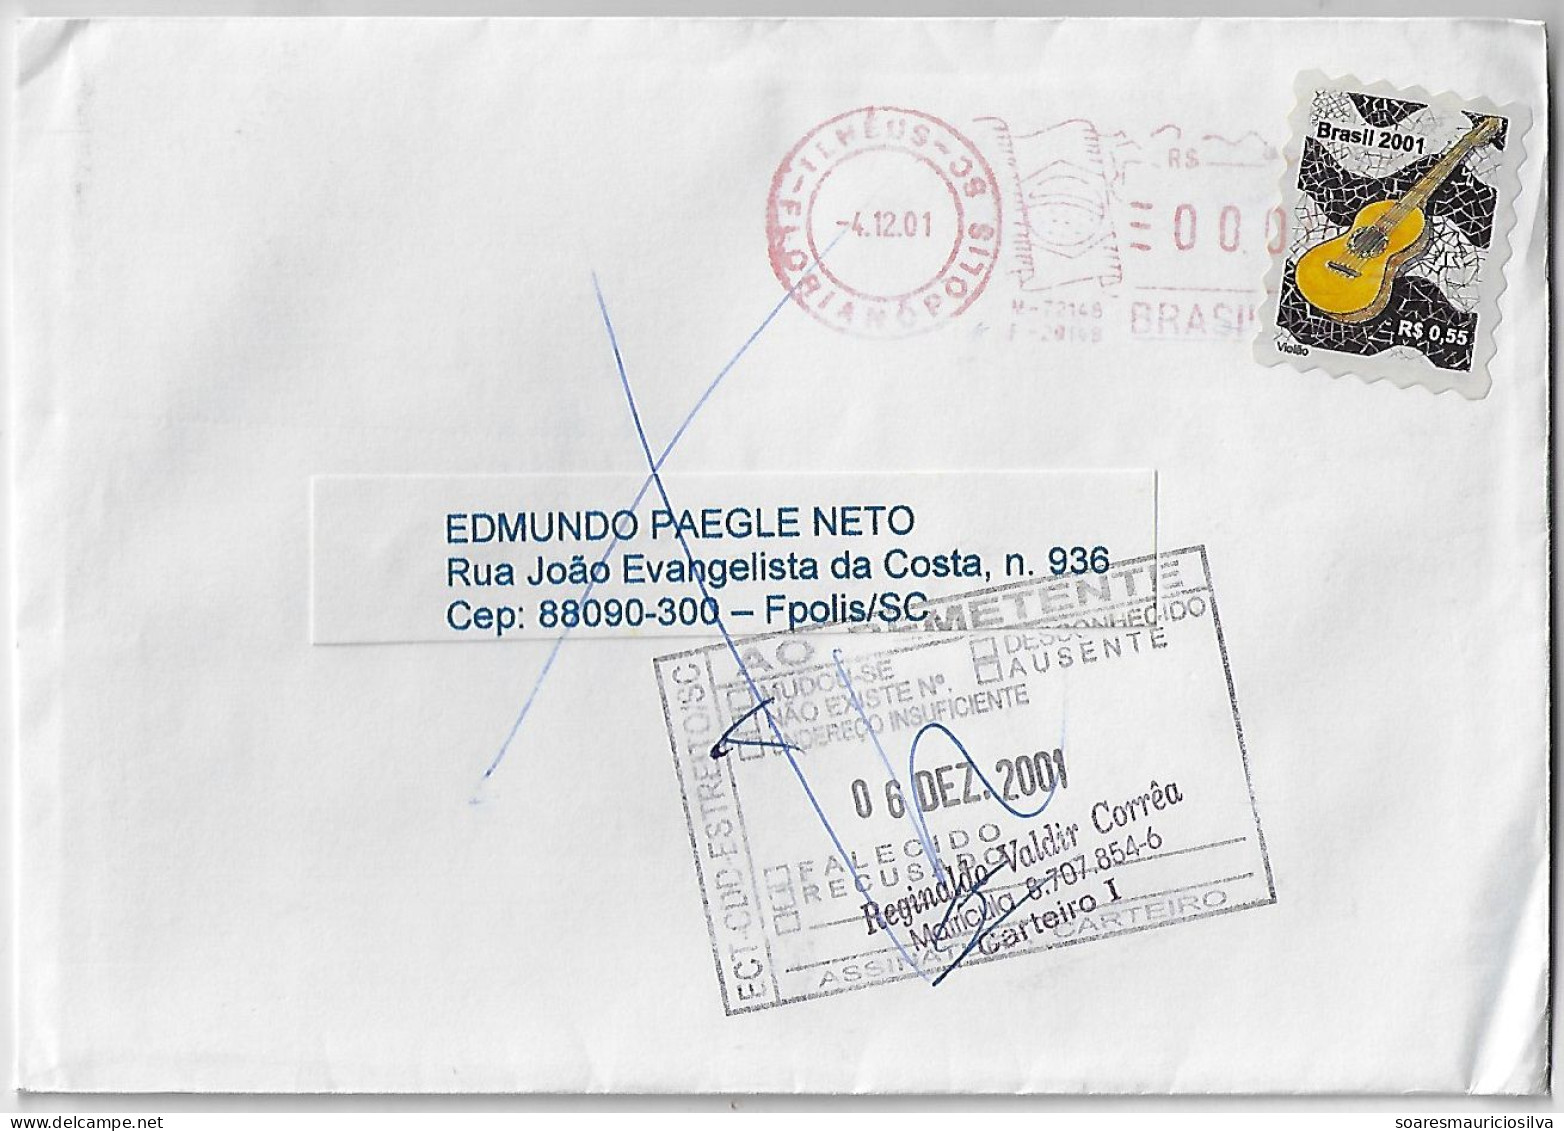 Brazil 2001 Returned Cover Florianópolis Ilhéus Agency Stamp Musical Instrument Guitar Canceled By Meter Stamp Zeo Value - Lettres & Documents